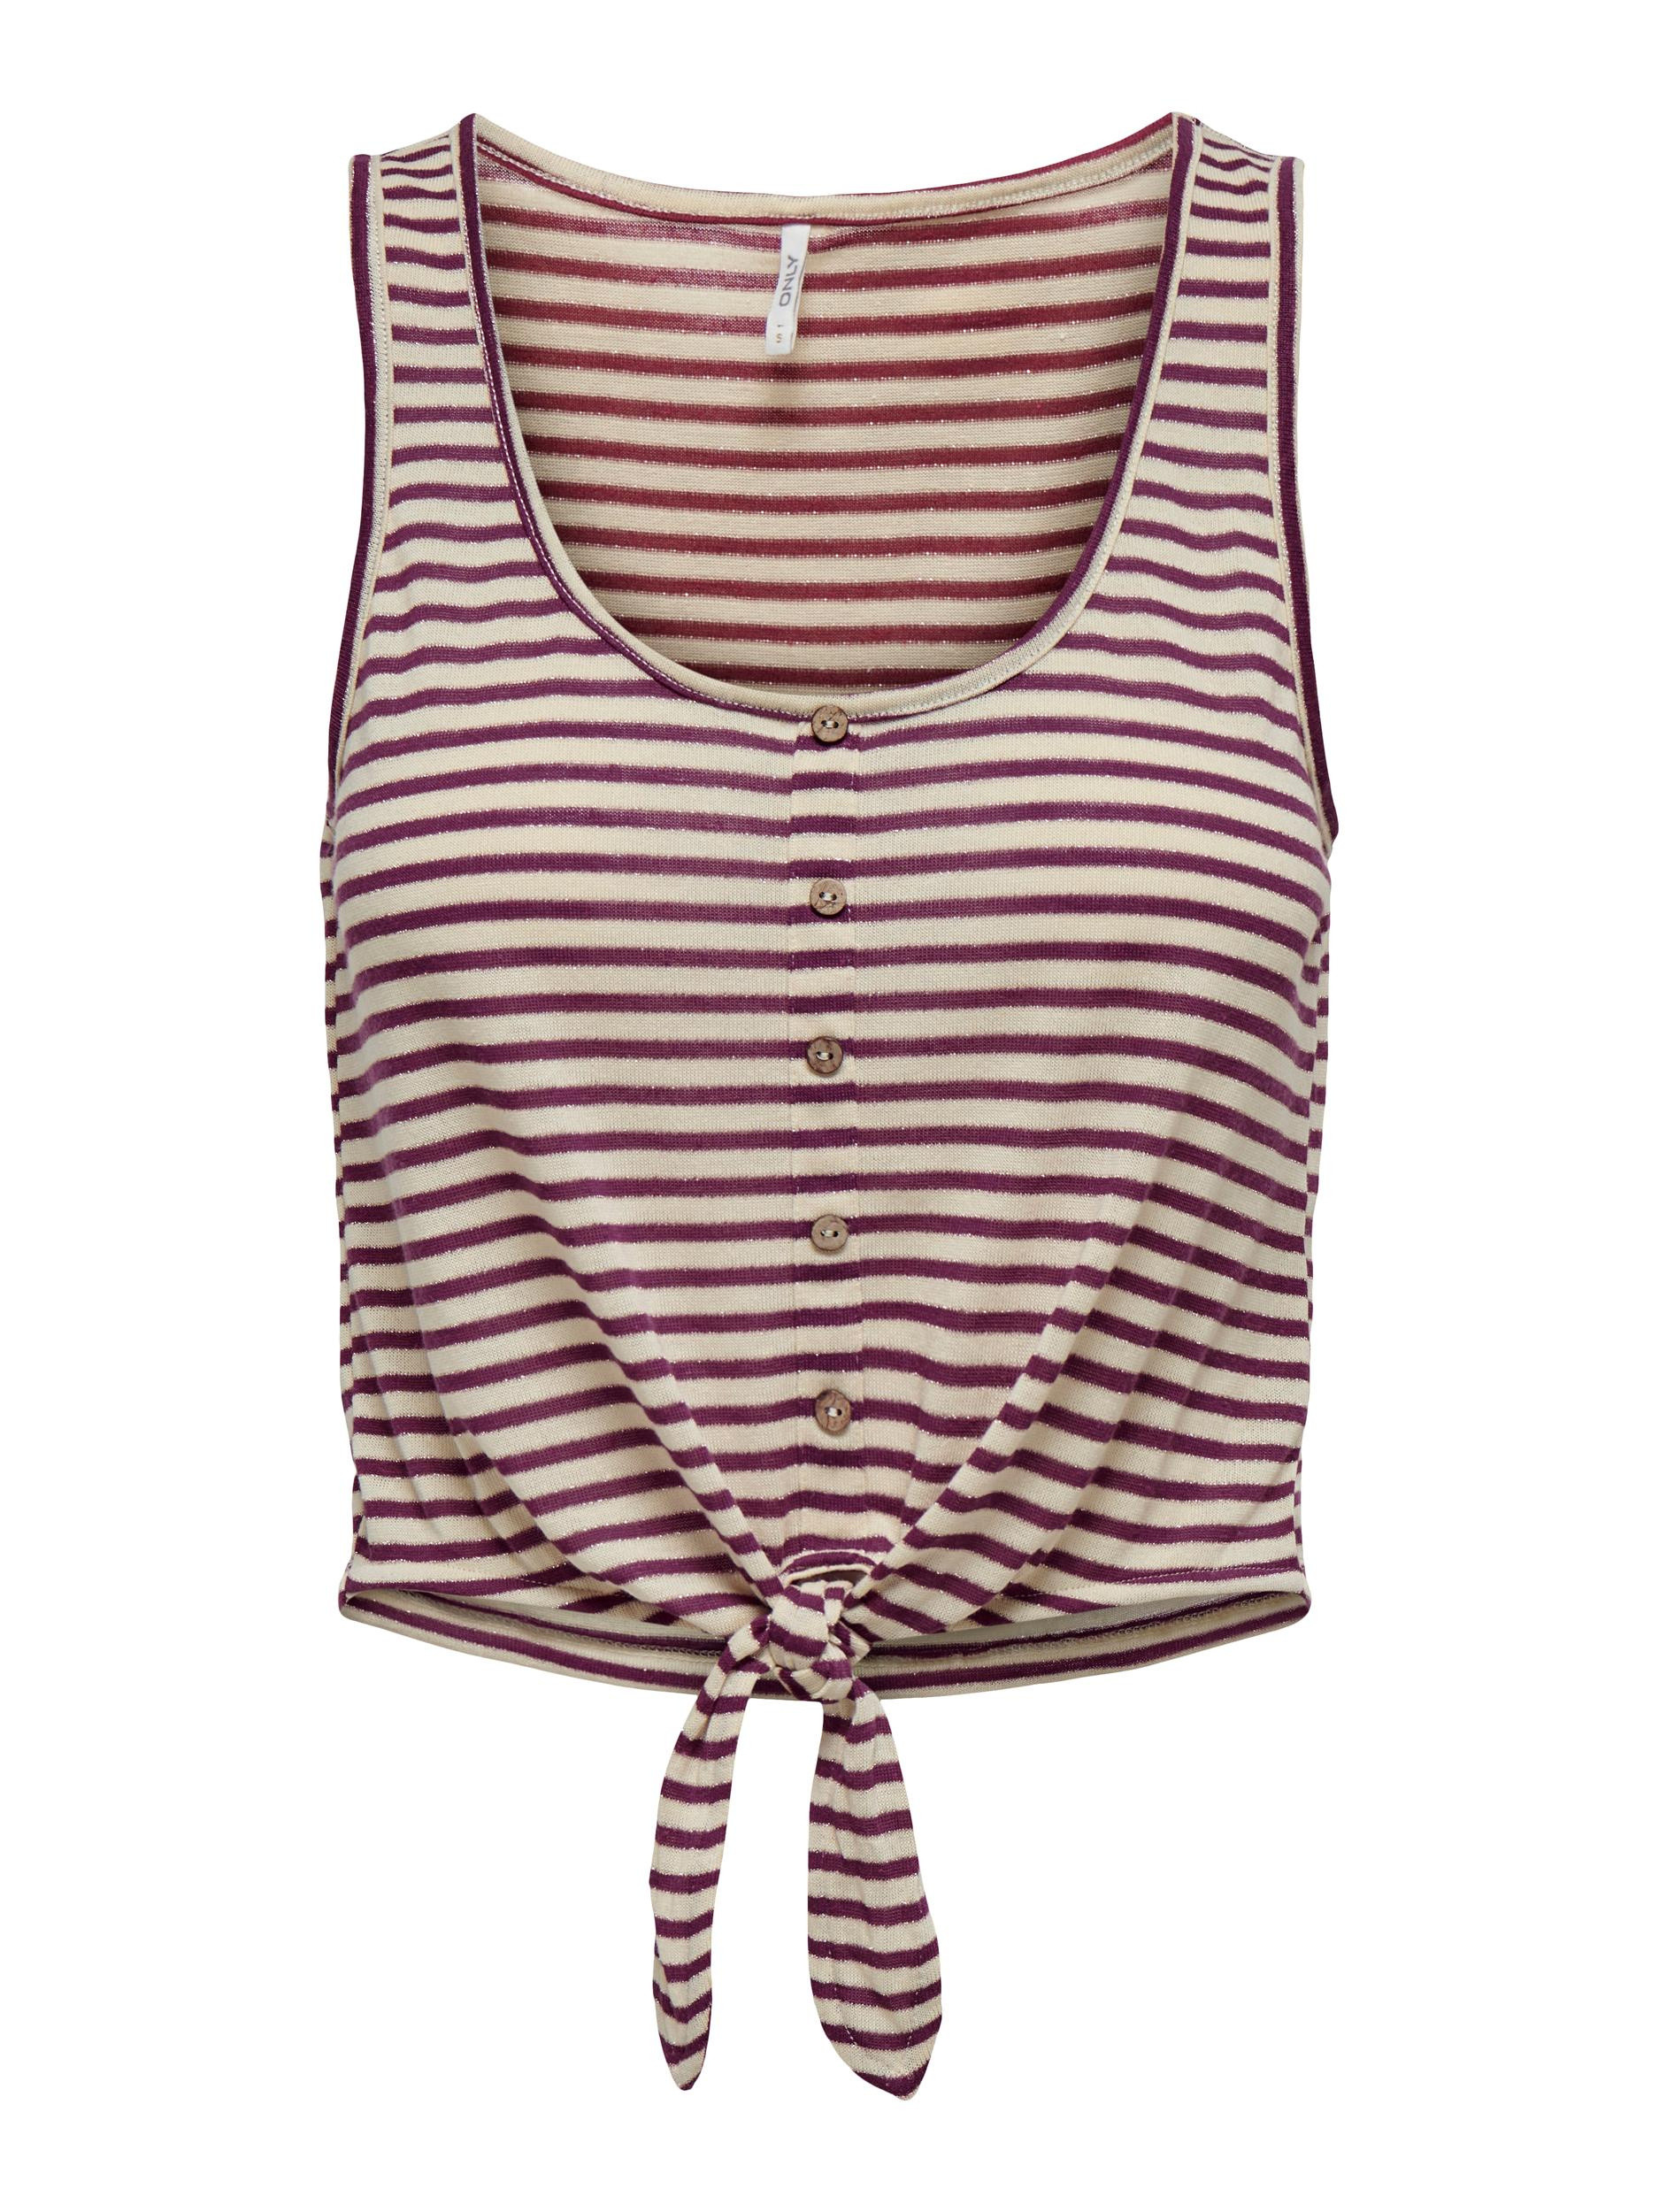 Only - Striped tank top, Dark Pink, large image number 0